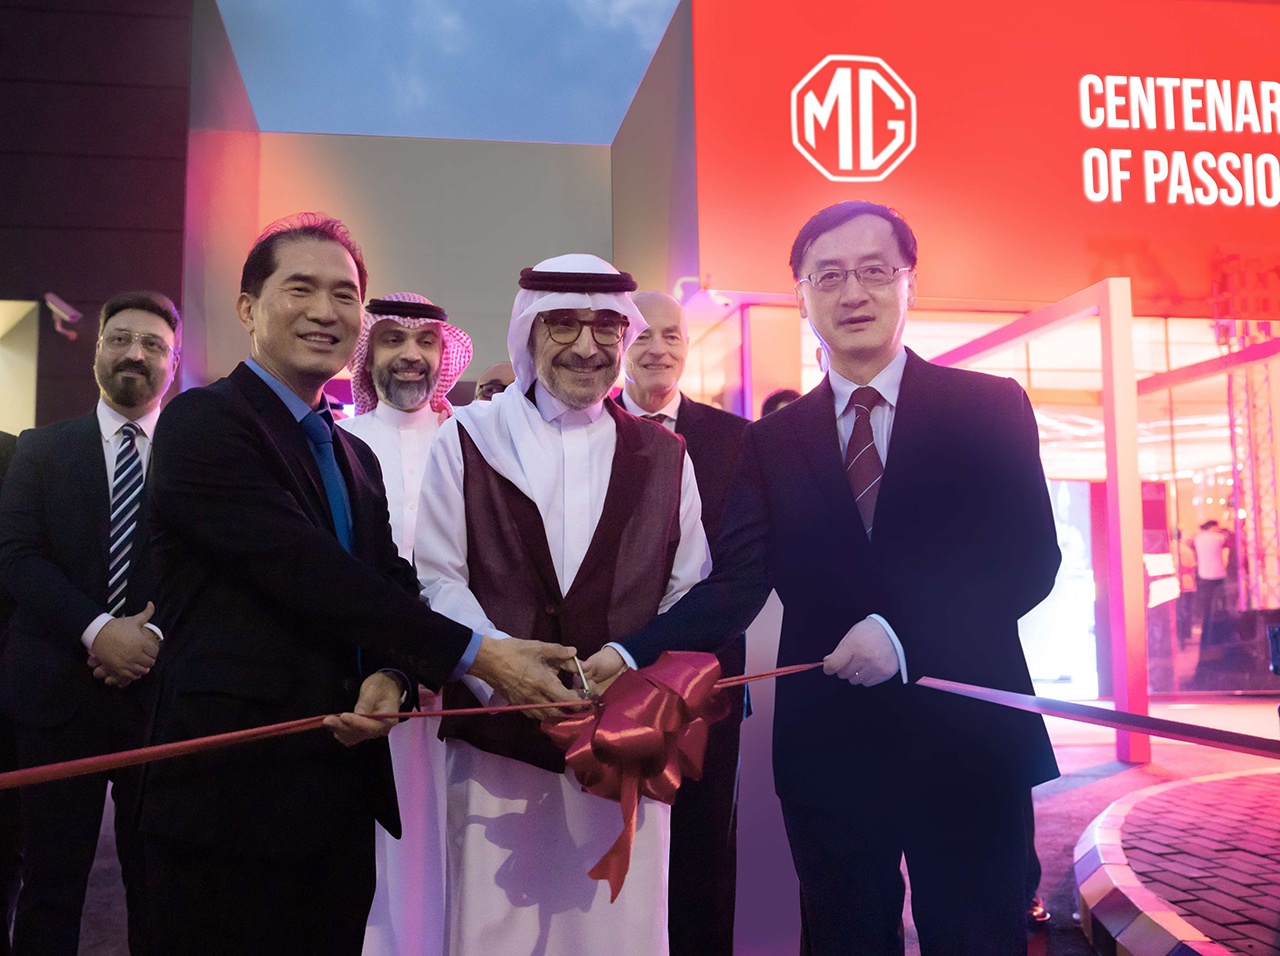 MG MOTOR AND JIAD MODERN MOTORS SET THE STAGE FOR A NEW ERA WITH JEDDAH AND RIYADH SHOWROOM LAUNCHES